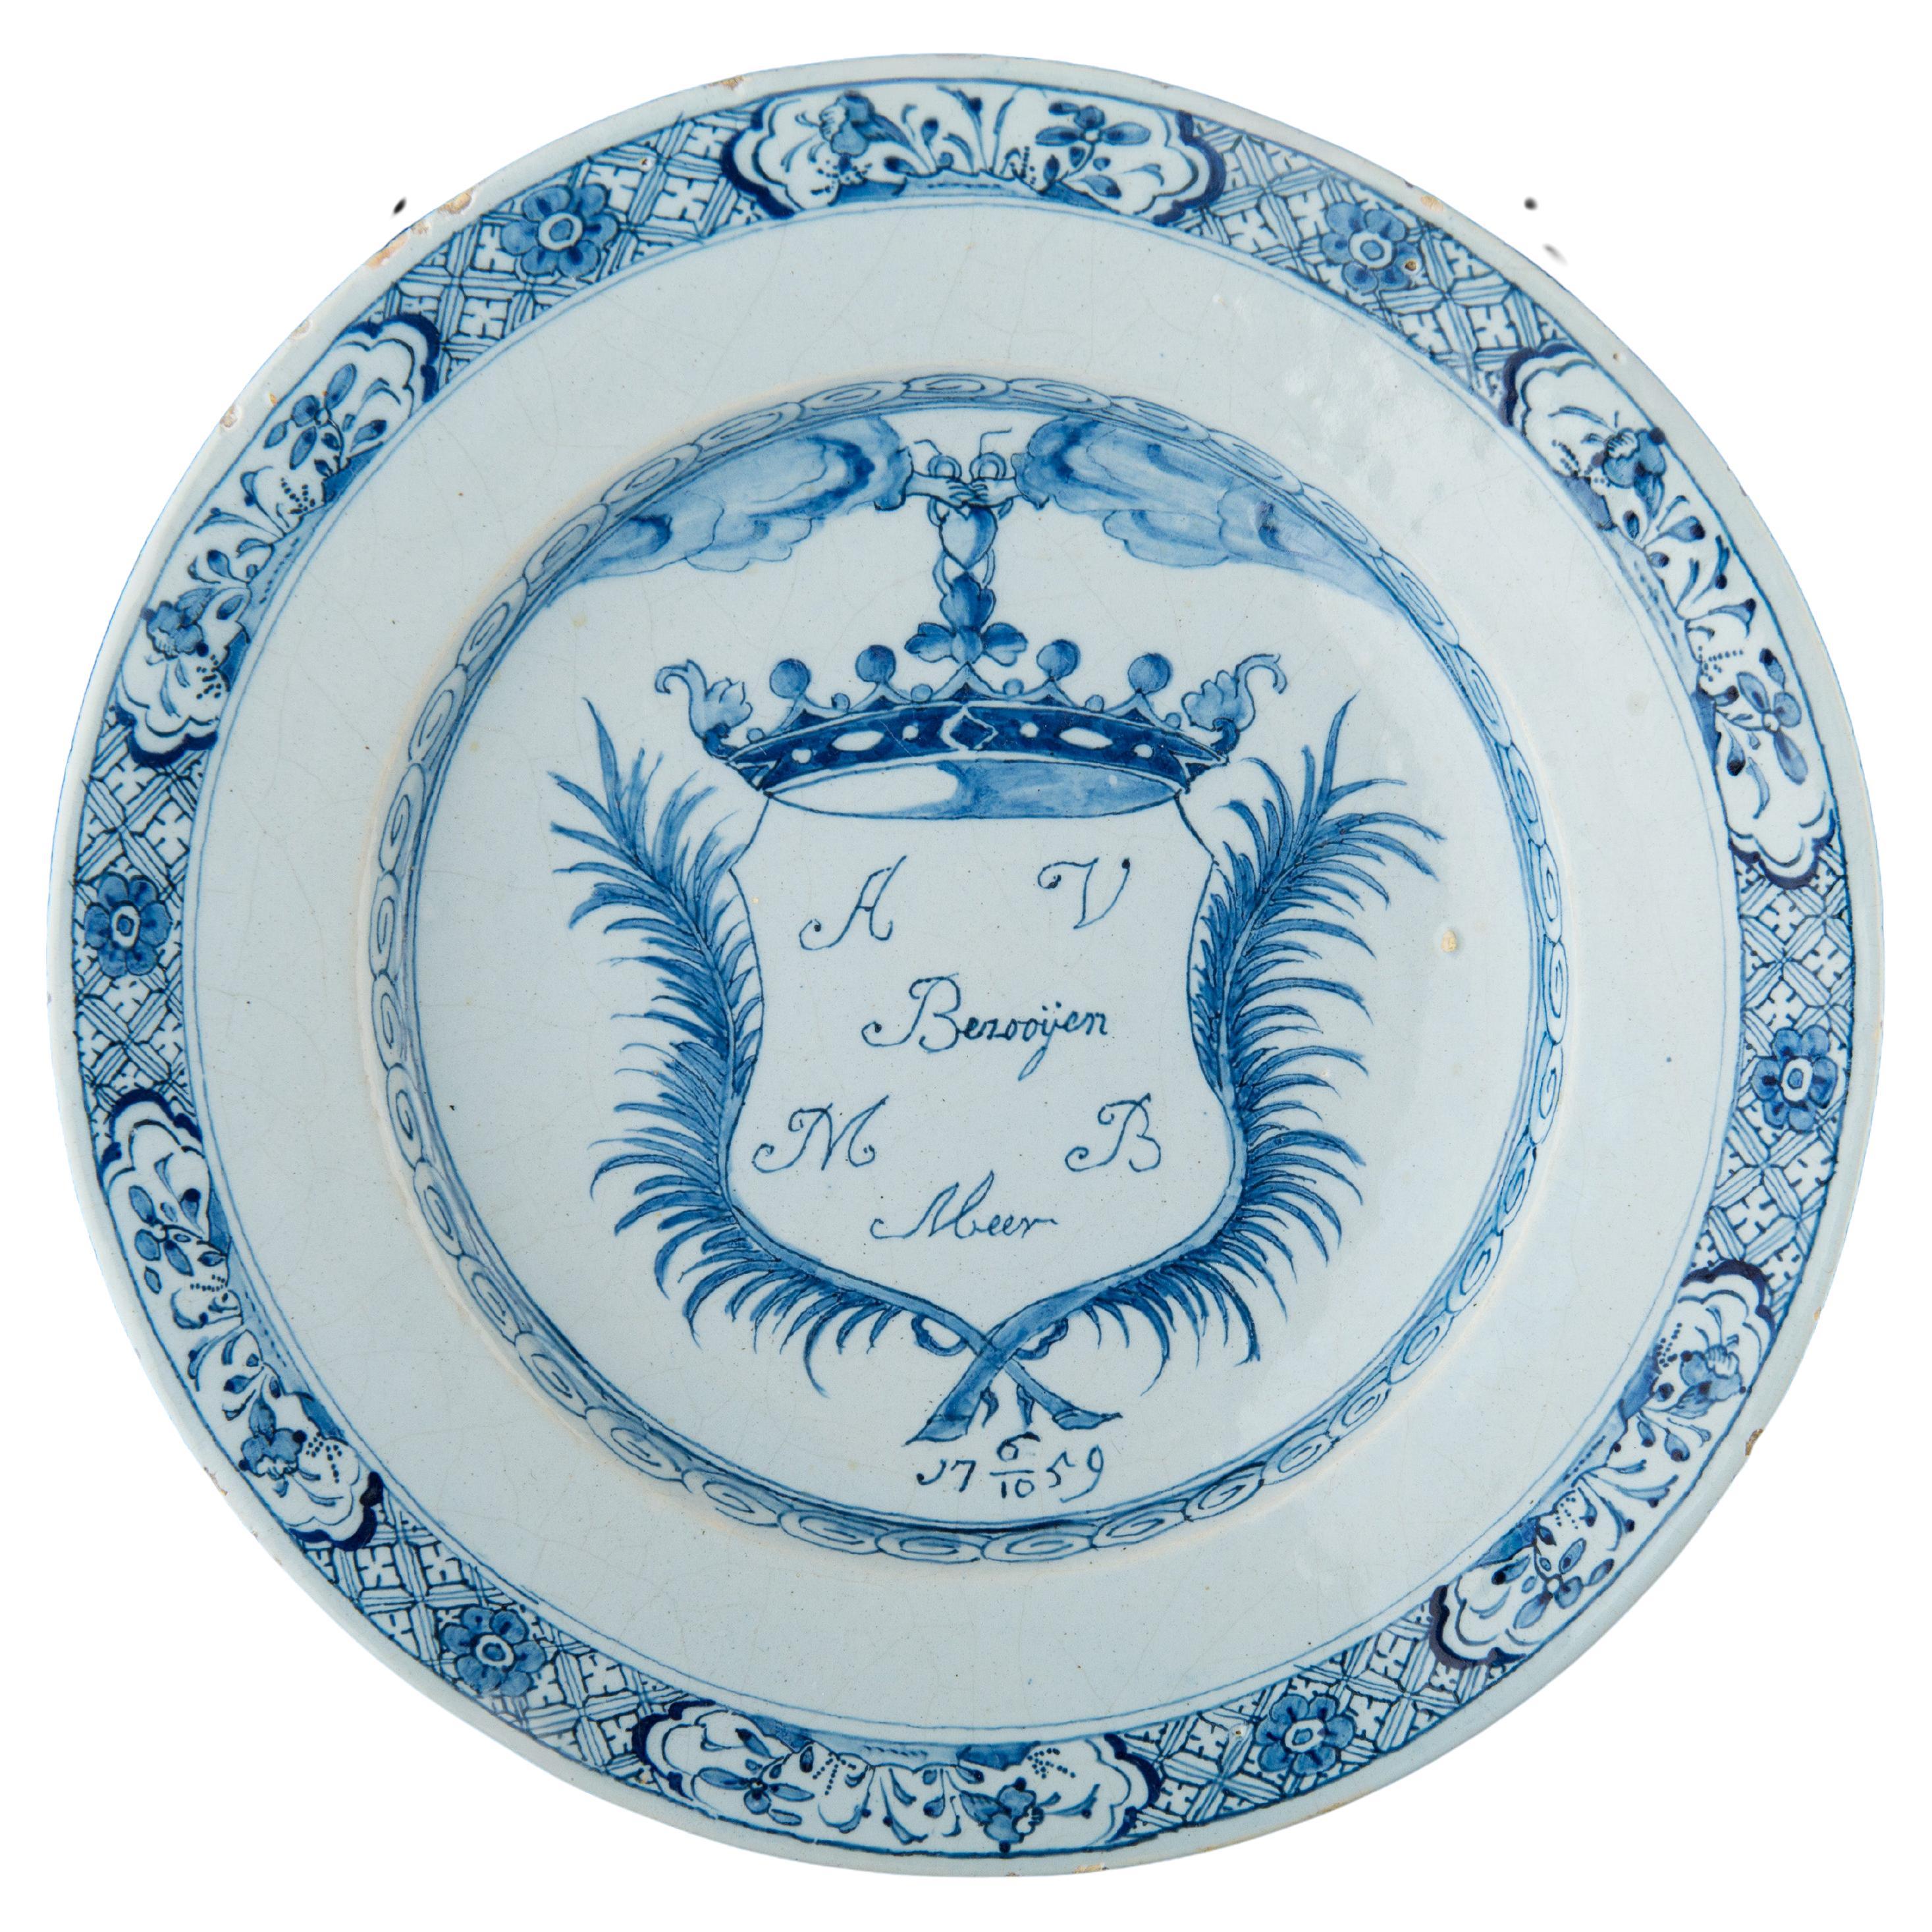 Blue and White Marriage Plate, Delft, Dated 1759